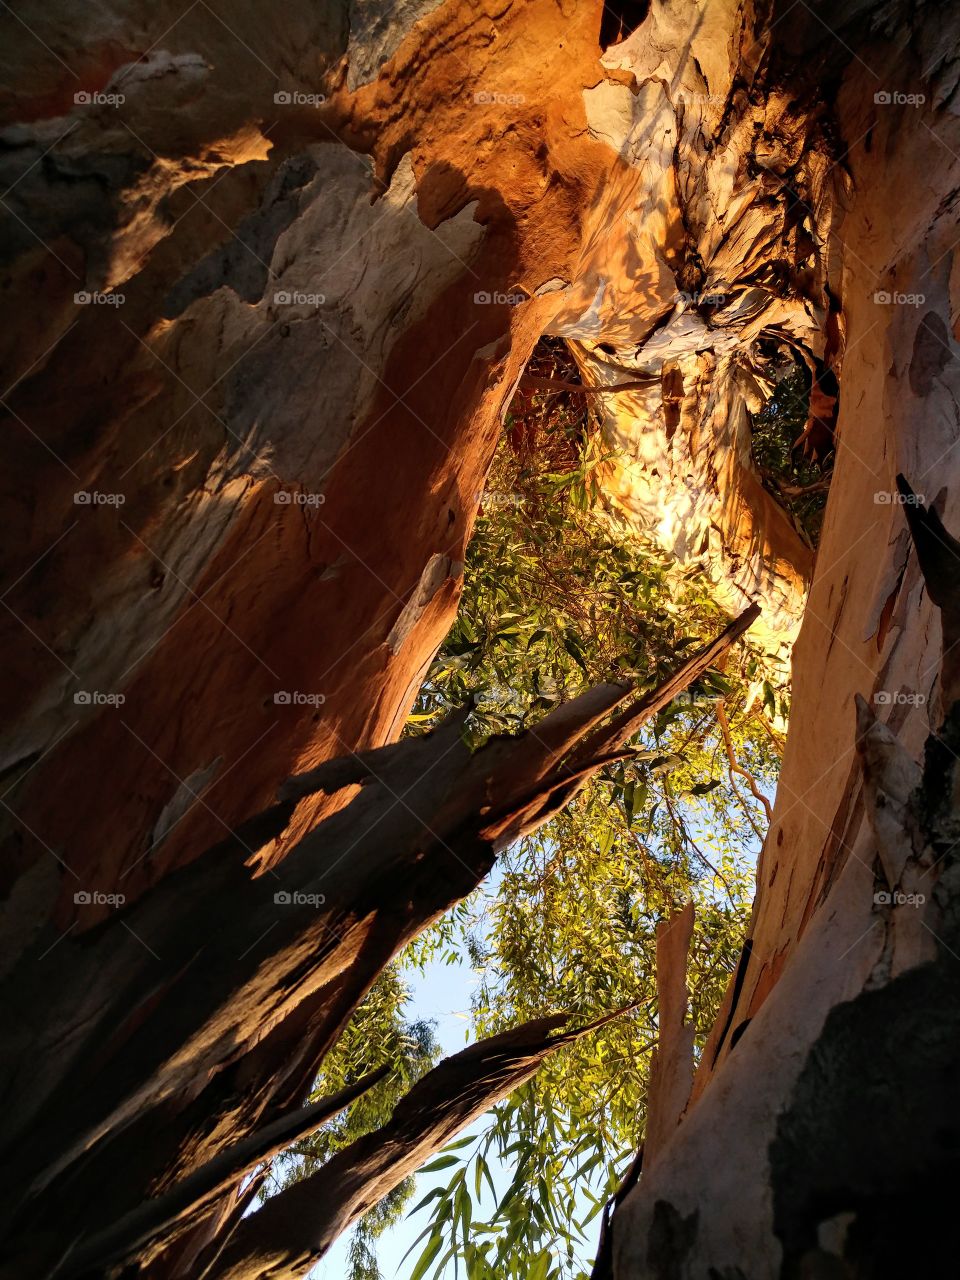 viewing partial sky and tall tree leaves through split in tree bark